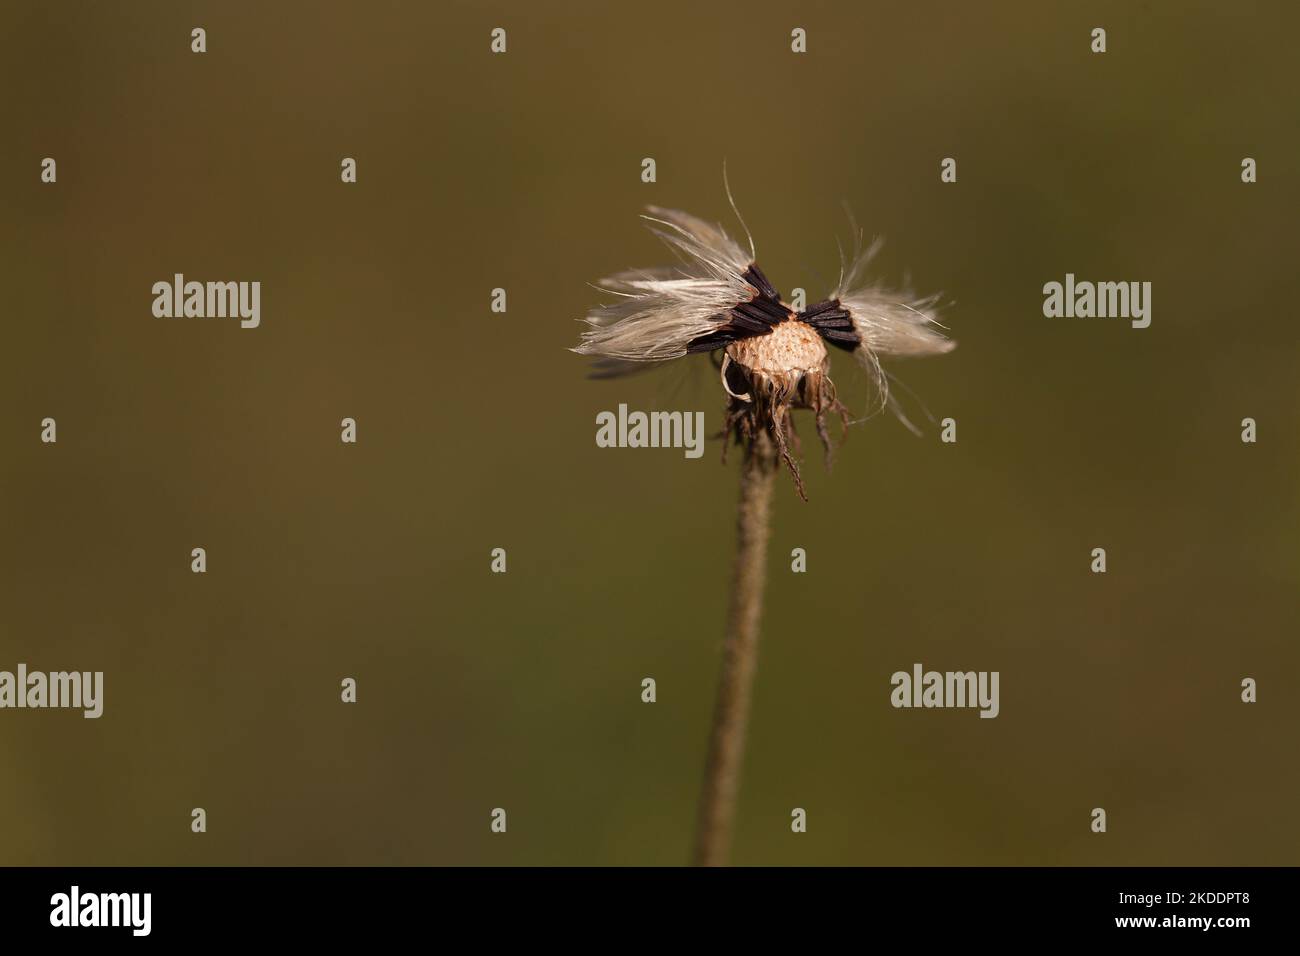 Seeds and stem of a dry dandelion against a blurry background. Few silky seeds attached to the head of a Taraxacum. Stock Photo